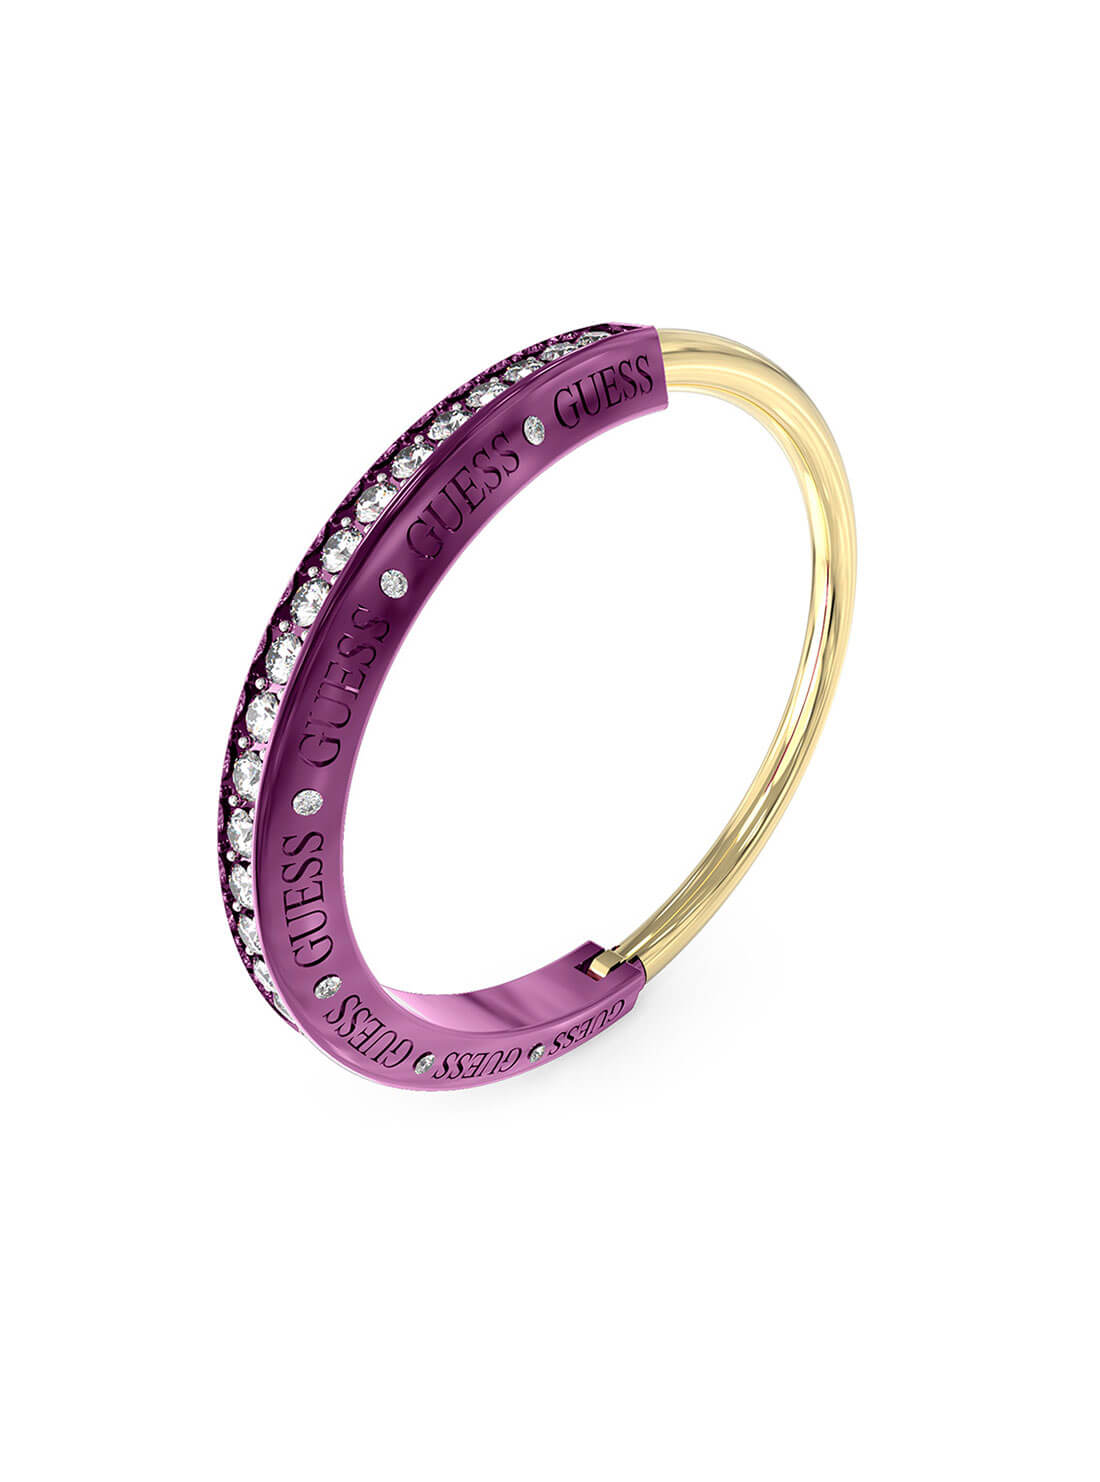 Gold and Purple Guess Bond Bracelet | GUESS Women's Jewellery | front view